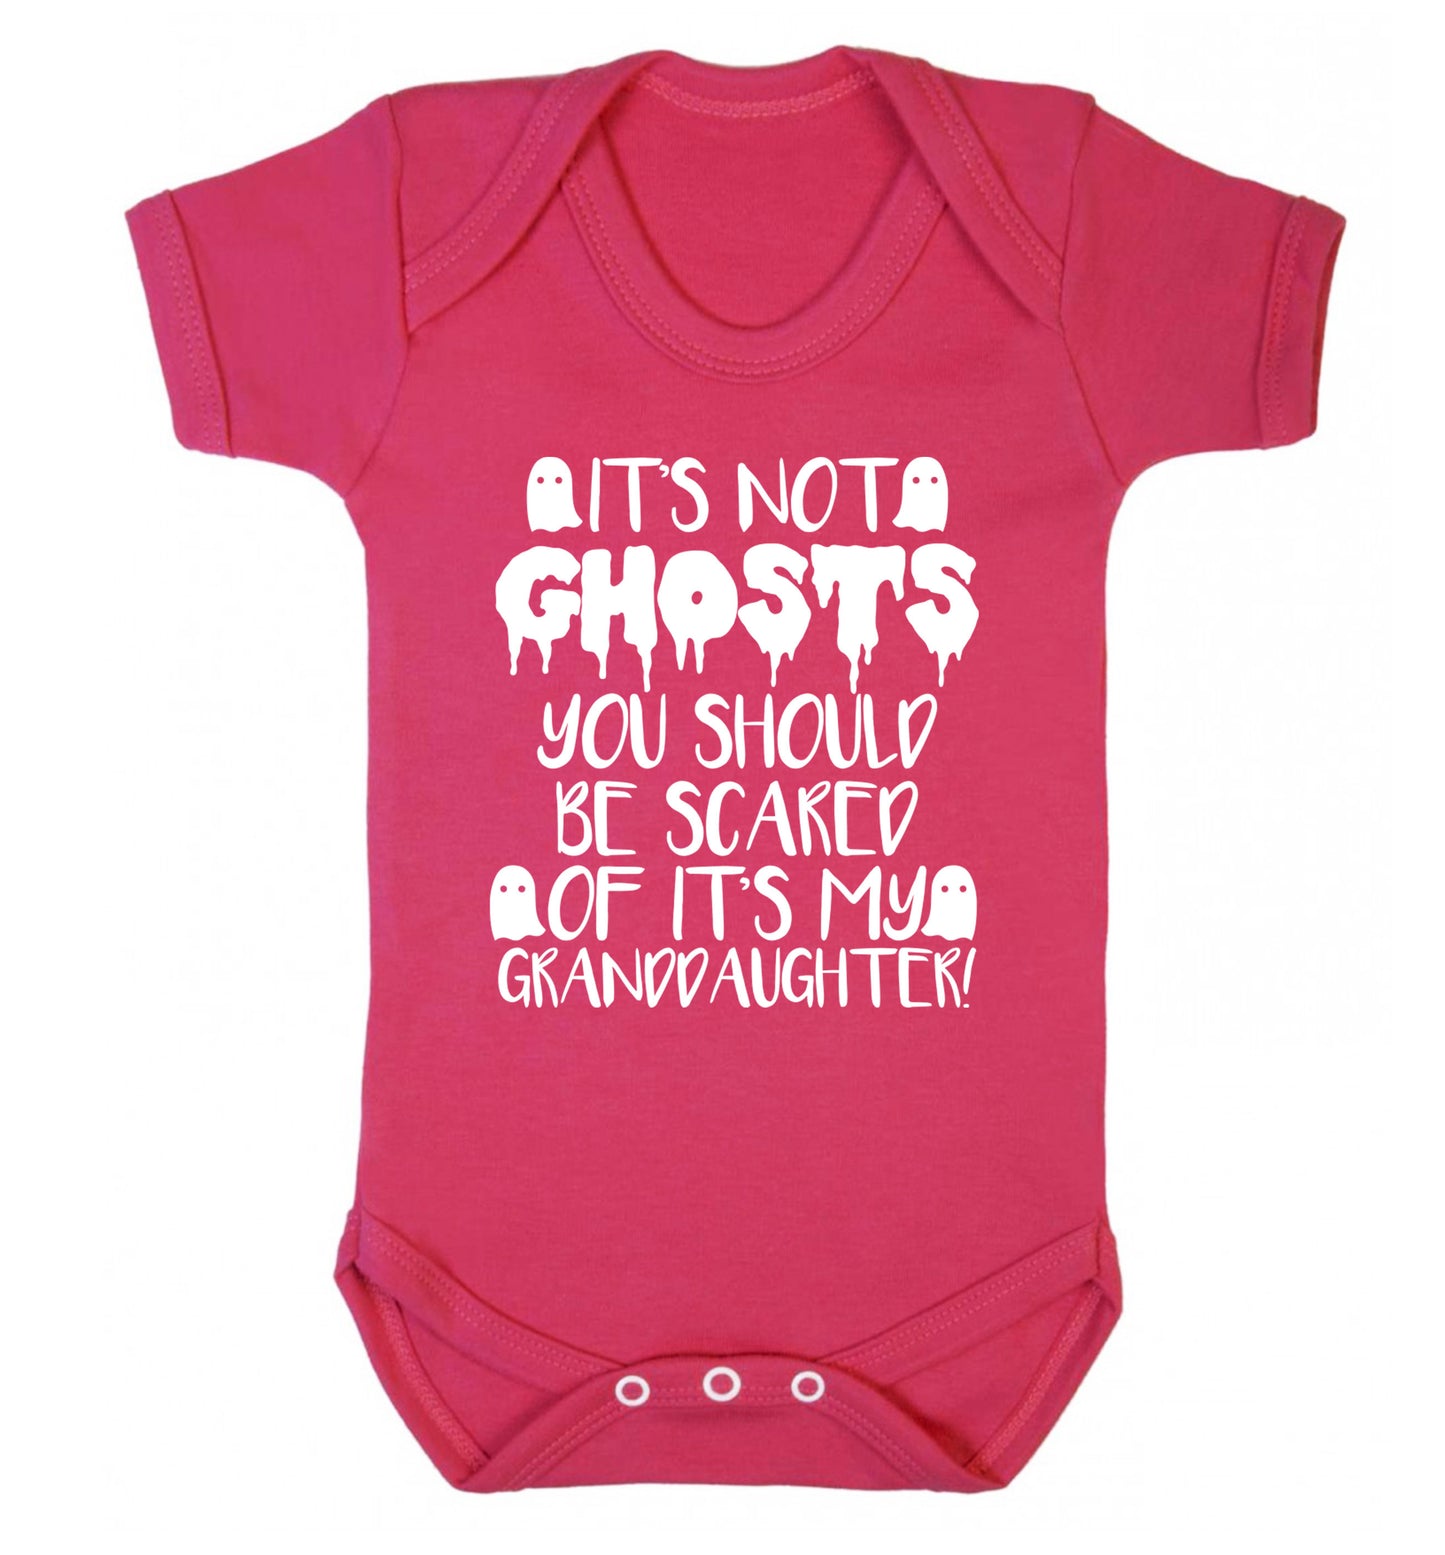 It's not ghosts you should be scared of it's my granddaughter! Baby Vest dark pink 18-24 months